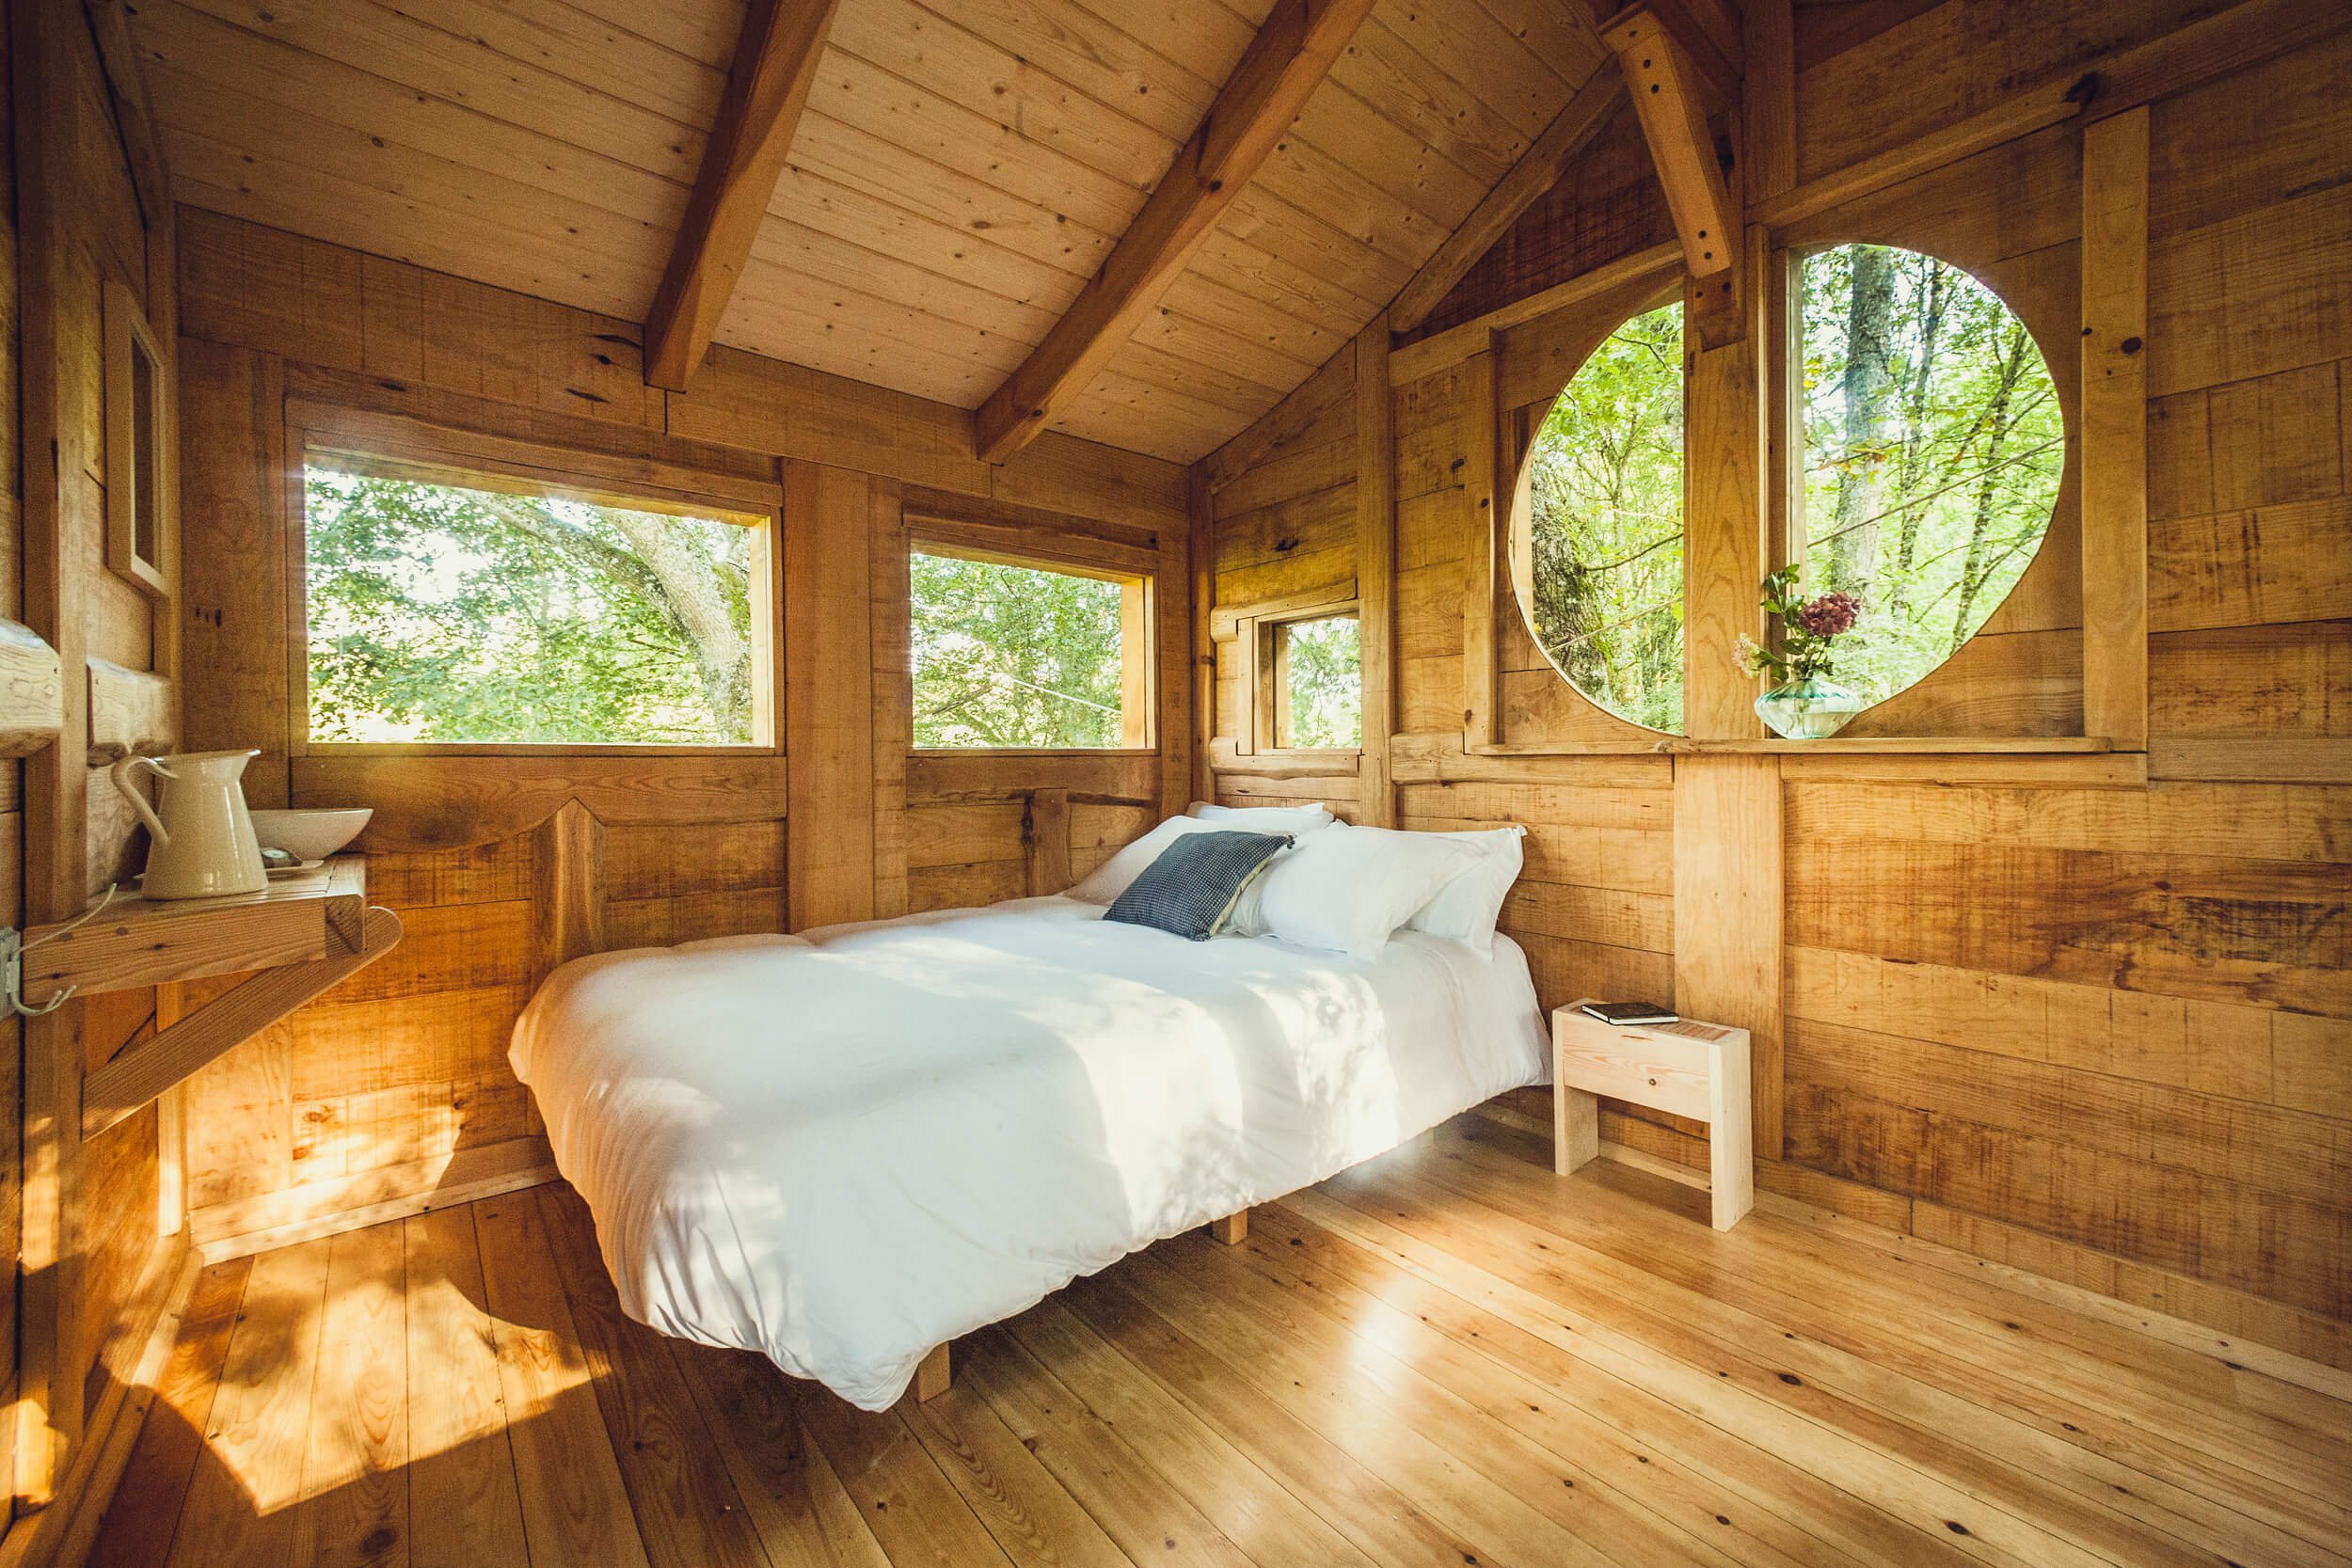 Escape to the forest- a look inside Basoa Suites' treehouses by MuruStudios advertising photographers in Madrid Barcelona Pamplona Spain 51.jpg